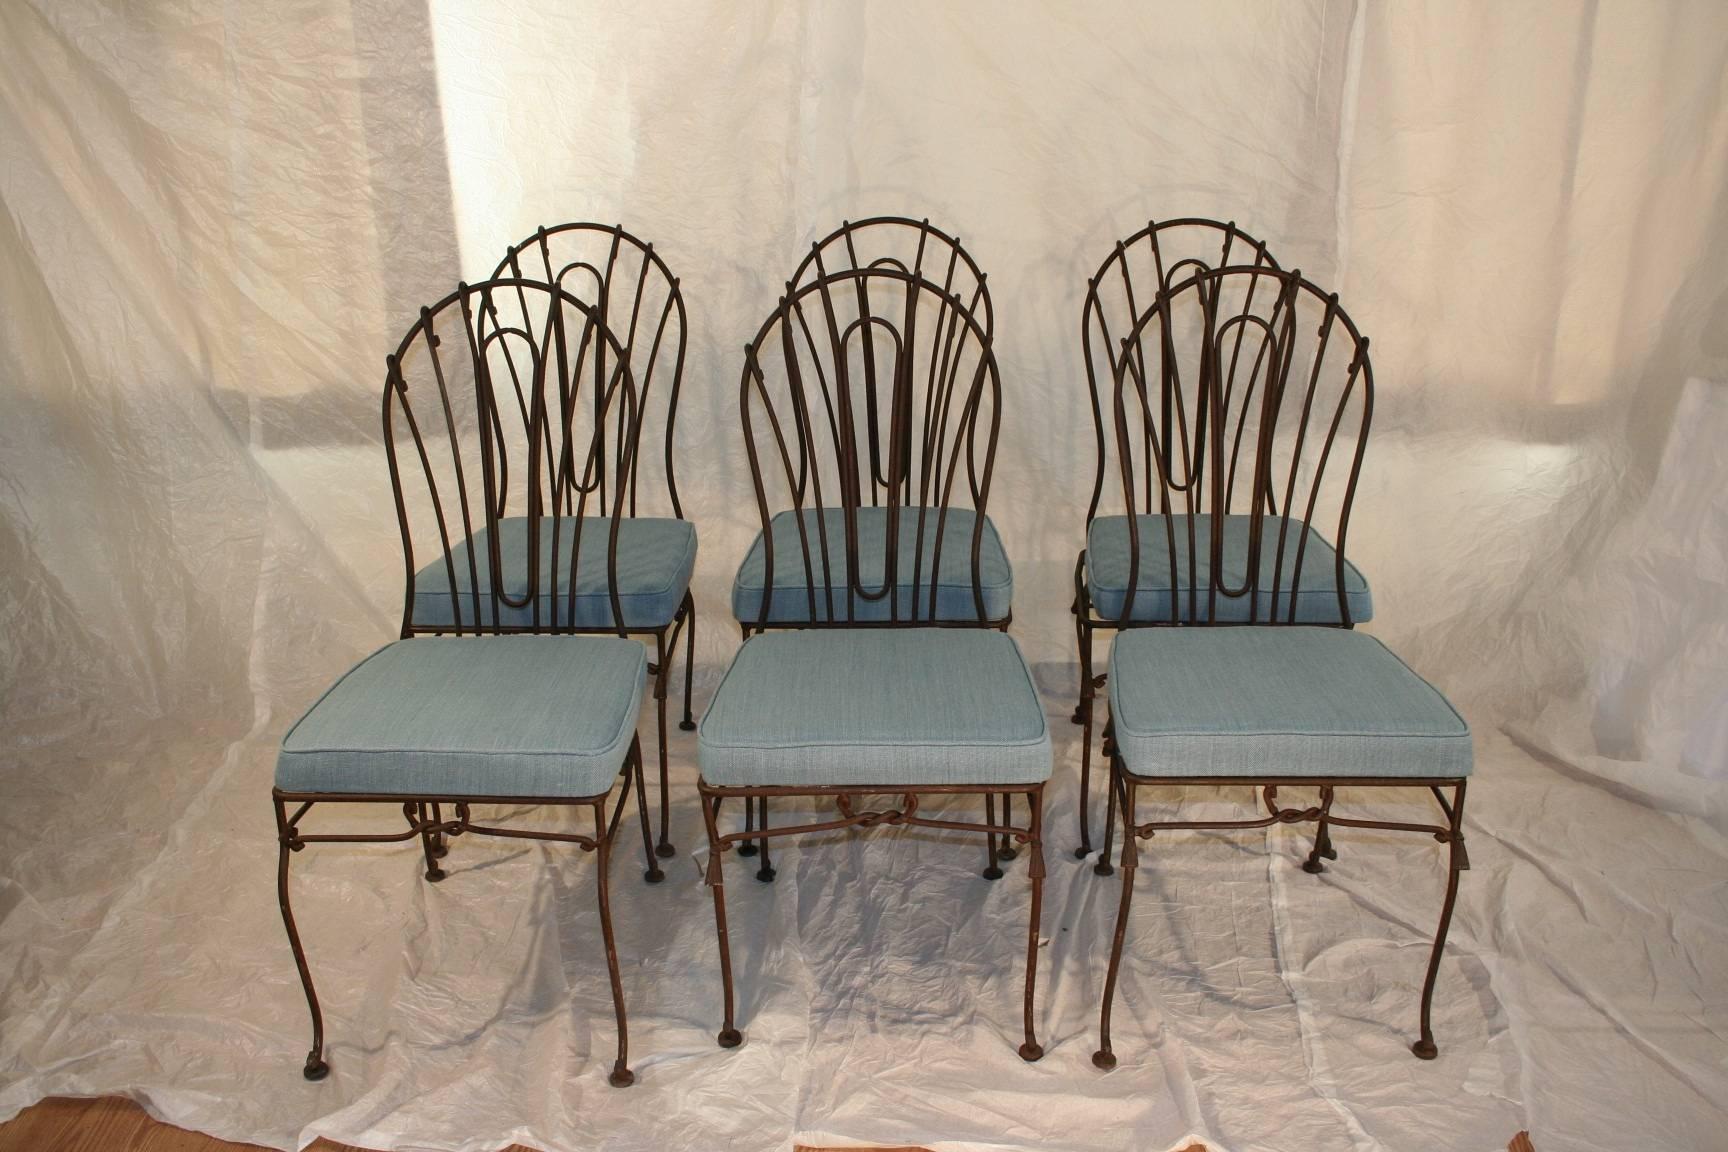 Set of eight wrought iron garden dining chairs with sturdy and removable cushions with newly upholstered pale blue fabric.